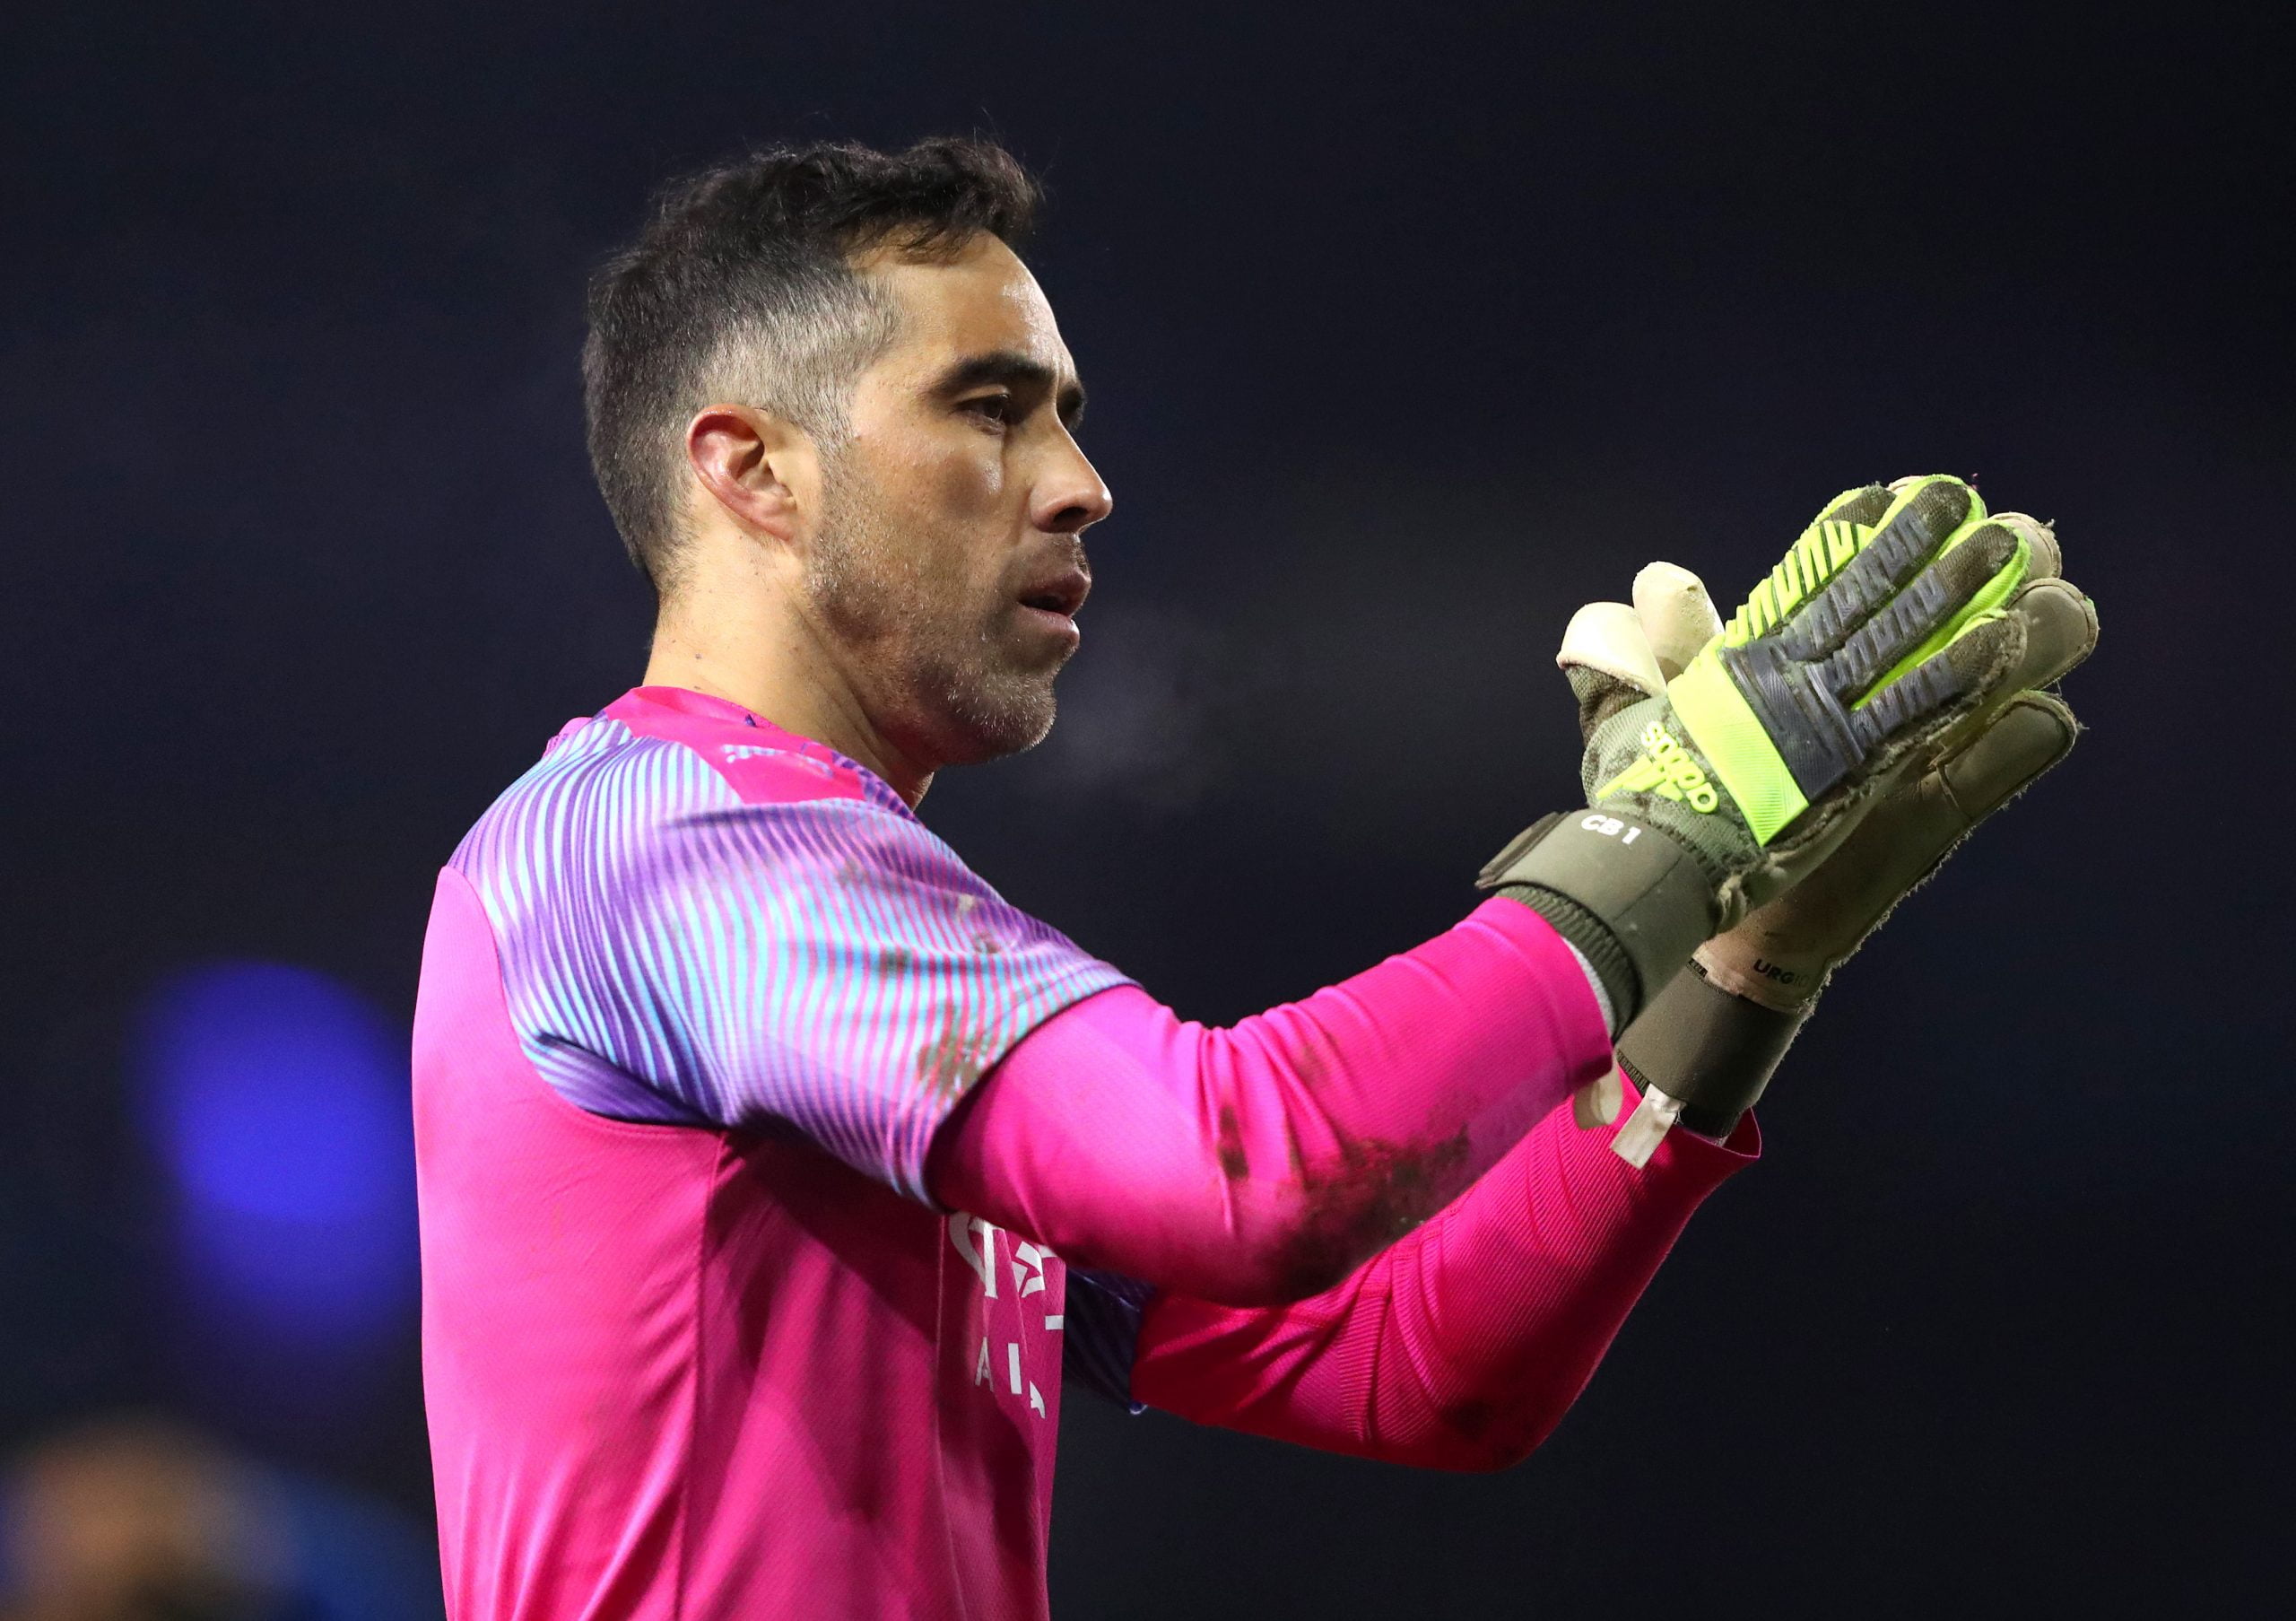 Celtic have set their sights on Claudio Bravo - A wise option for Celtic?